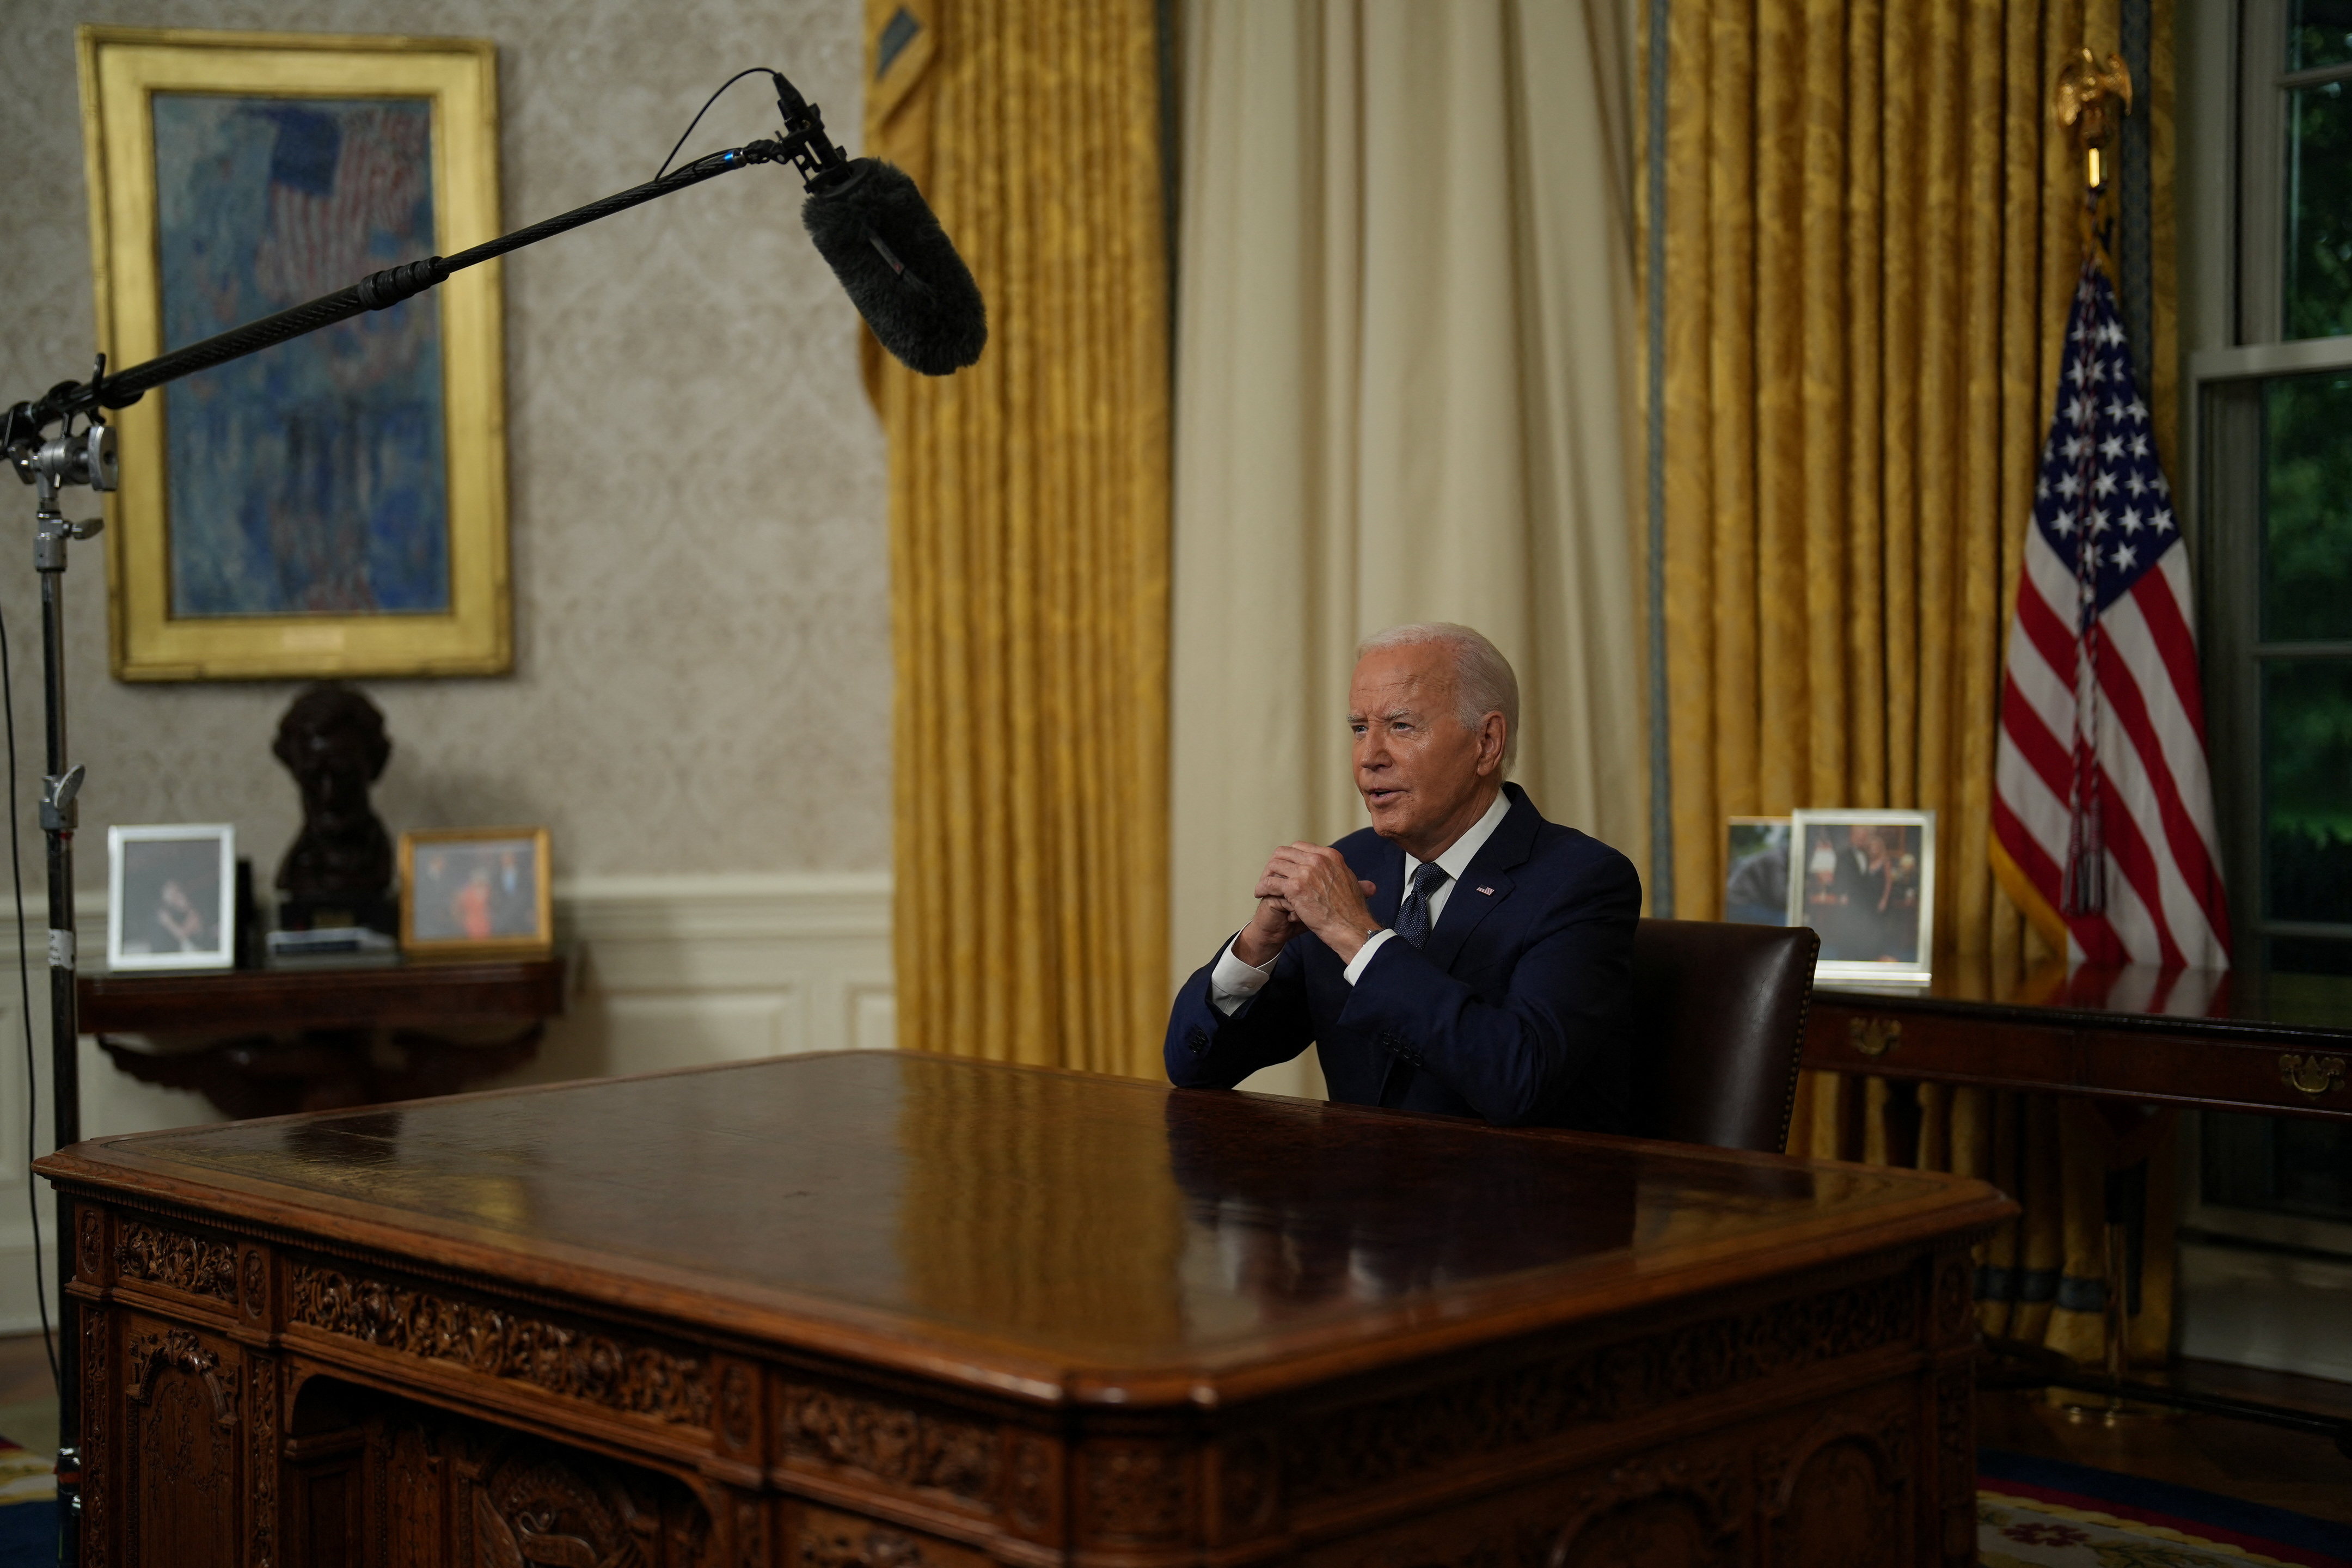 U.S. President Joe Biden addresses the nation from the Oval Office in the White House, in Washington